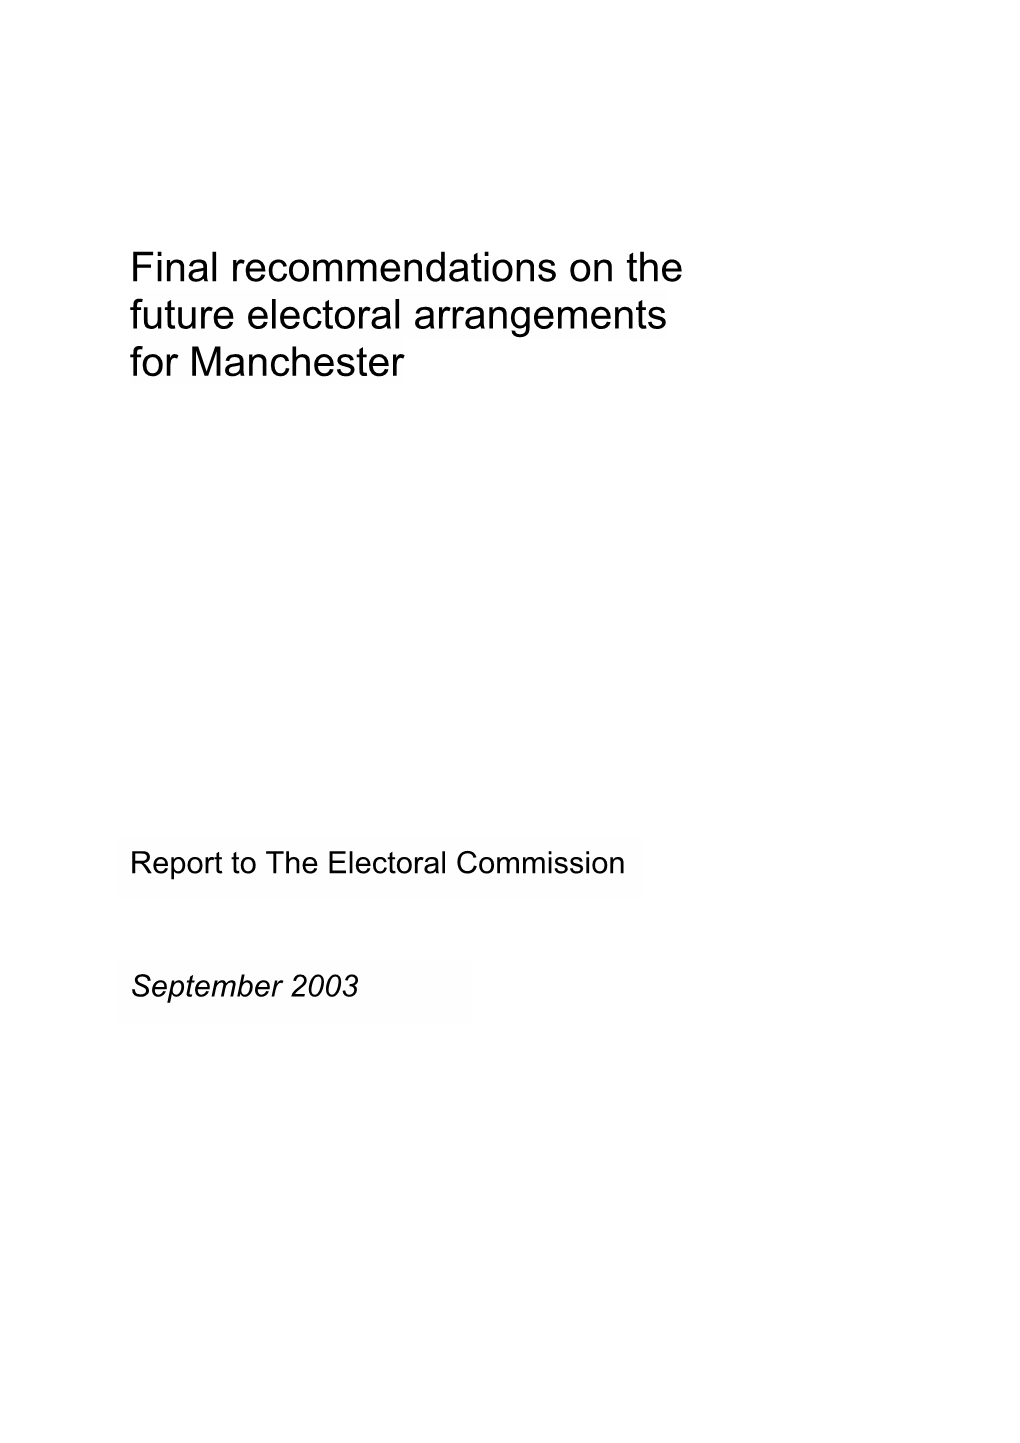 Final Recommendations on the Future Electoral Arrangements for Manchester